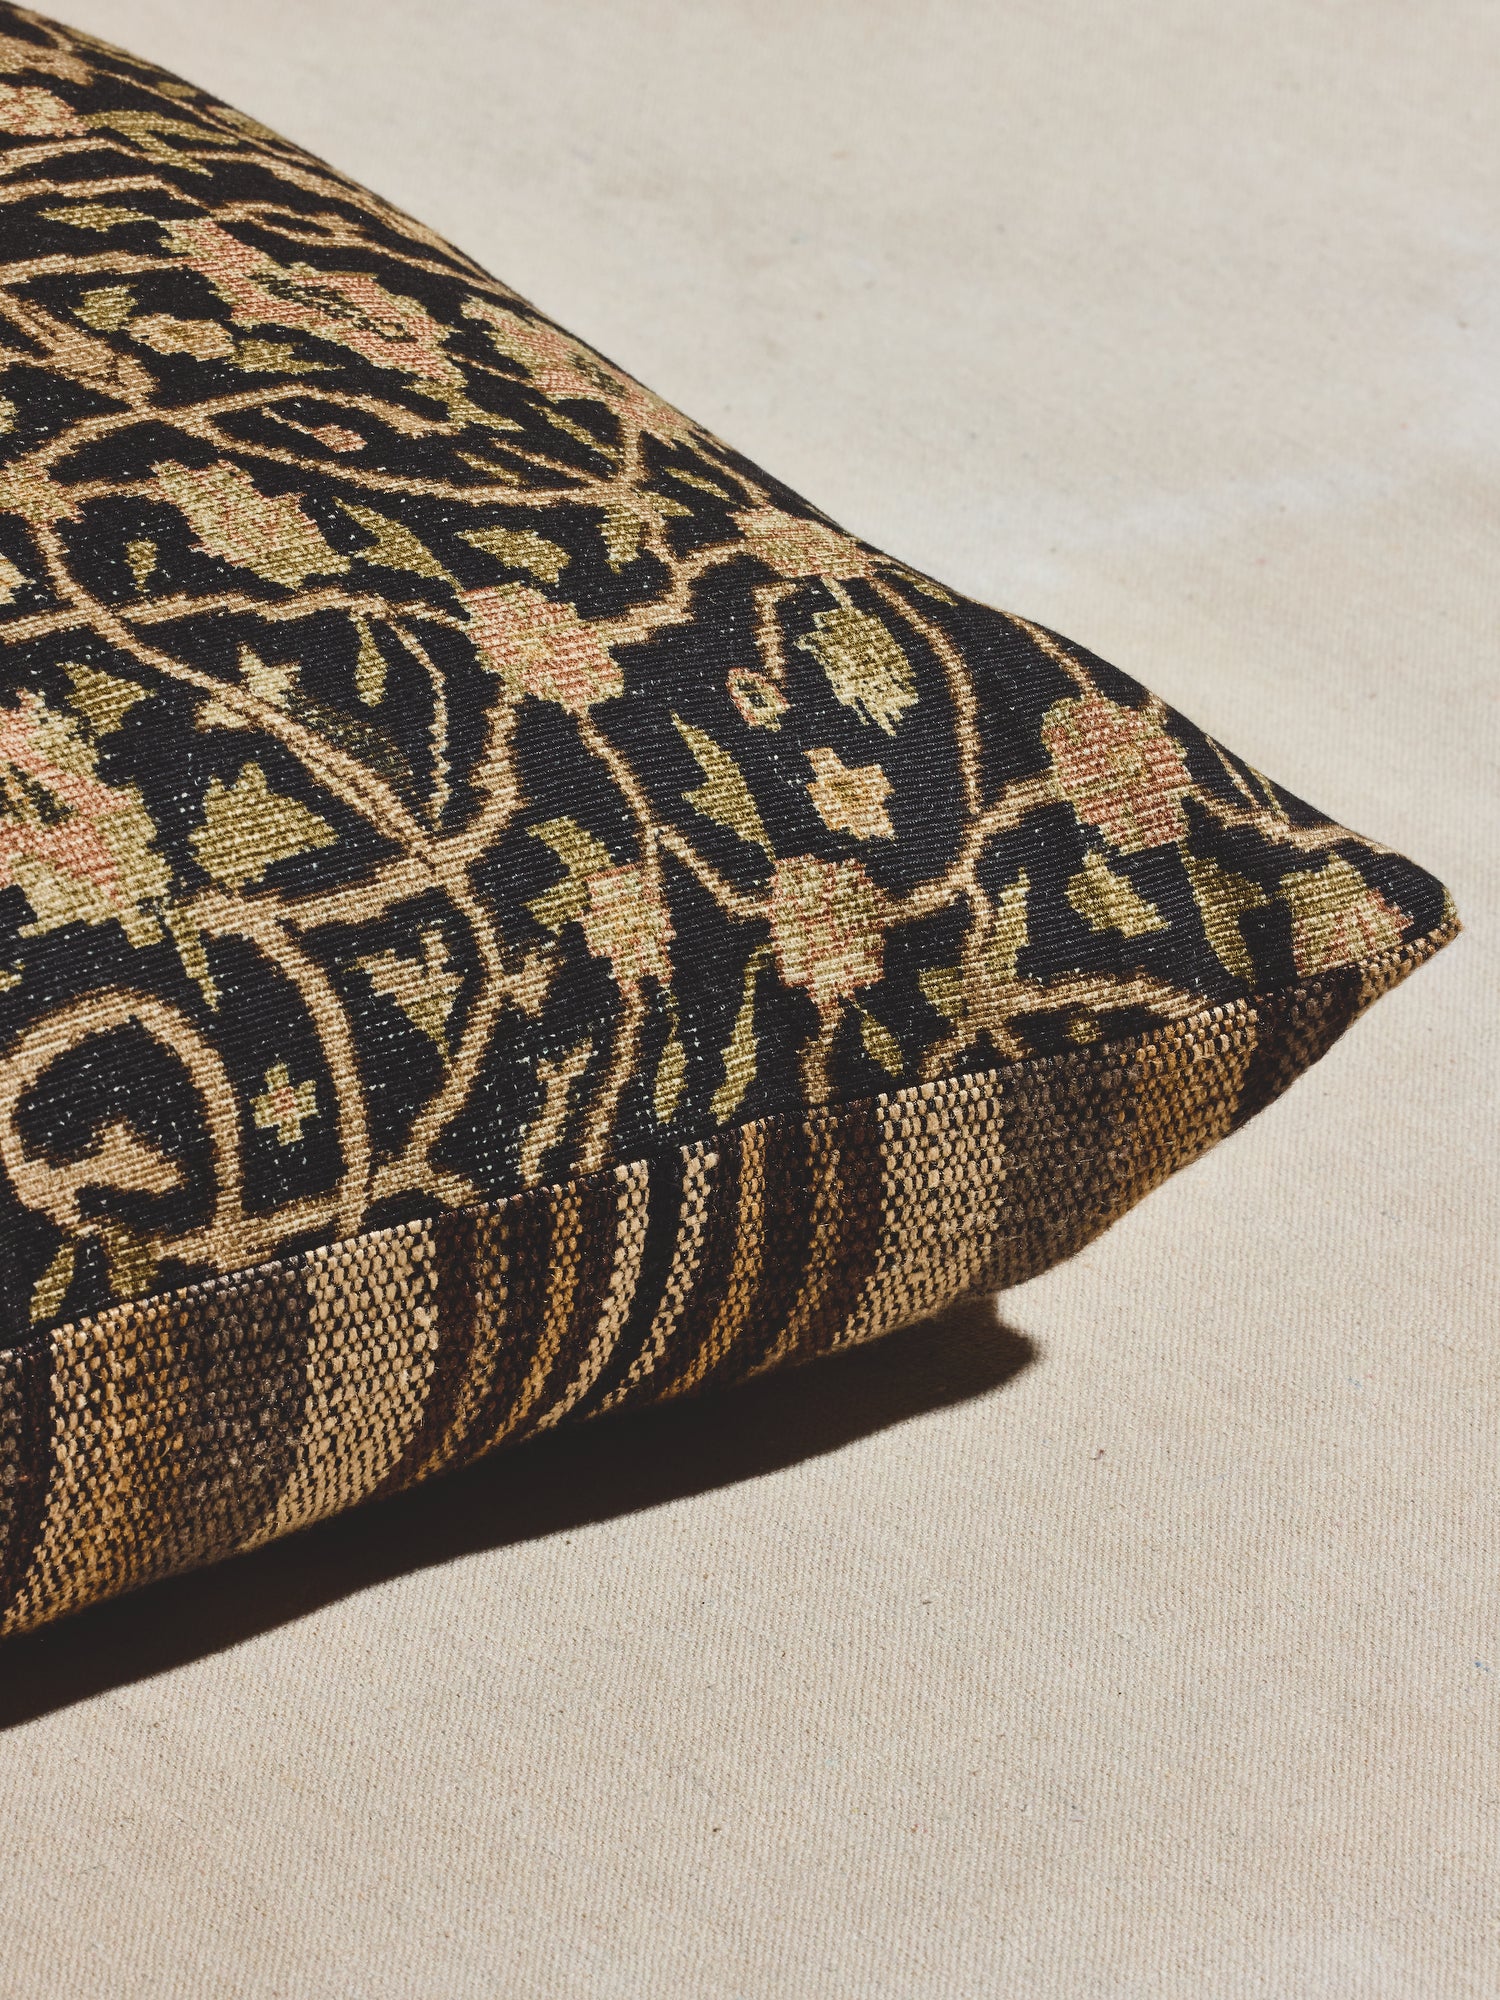 Black print woven pillow with floral motif and central medallion. 